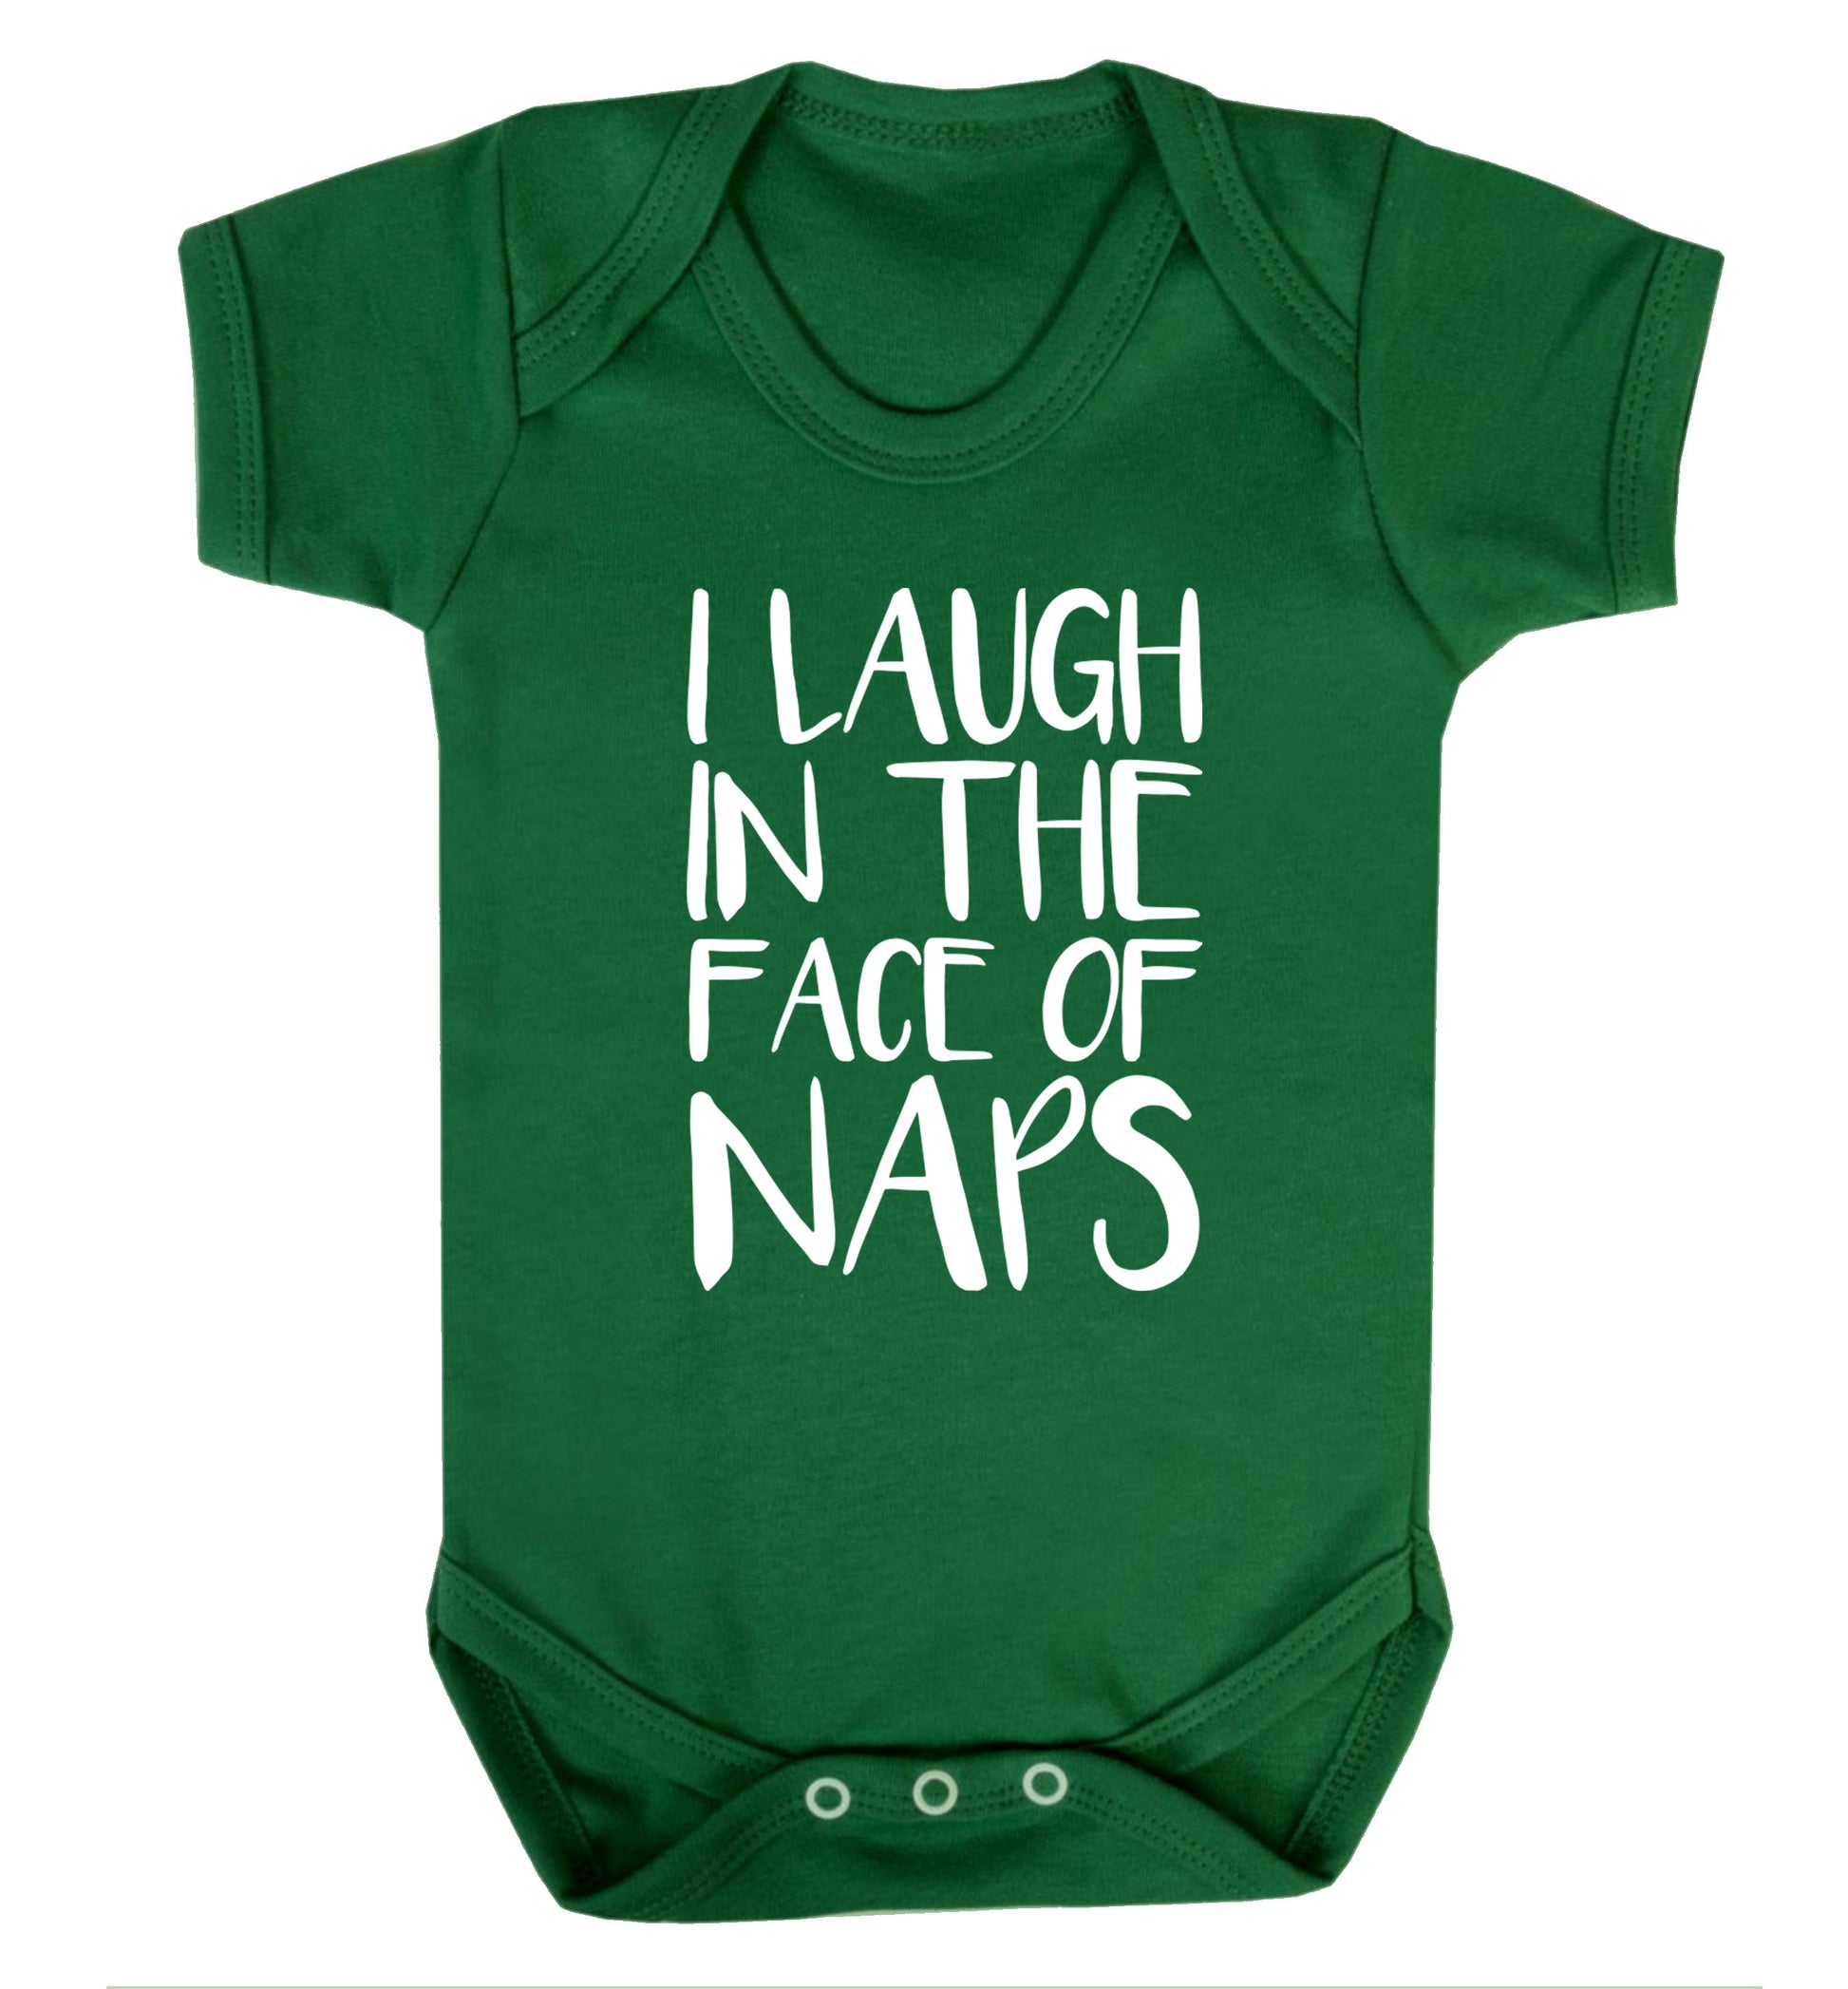 I laugh in the face of naps Baby Vest green 18-24 months